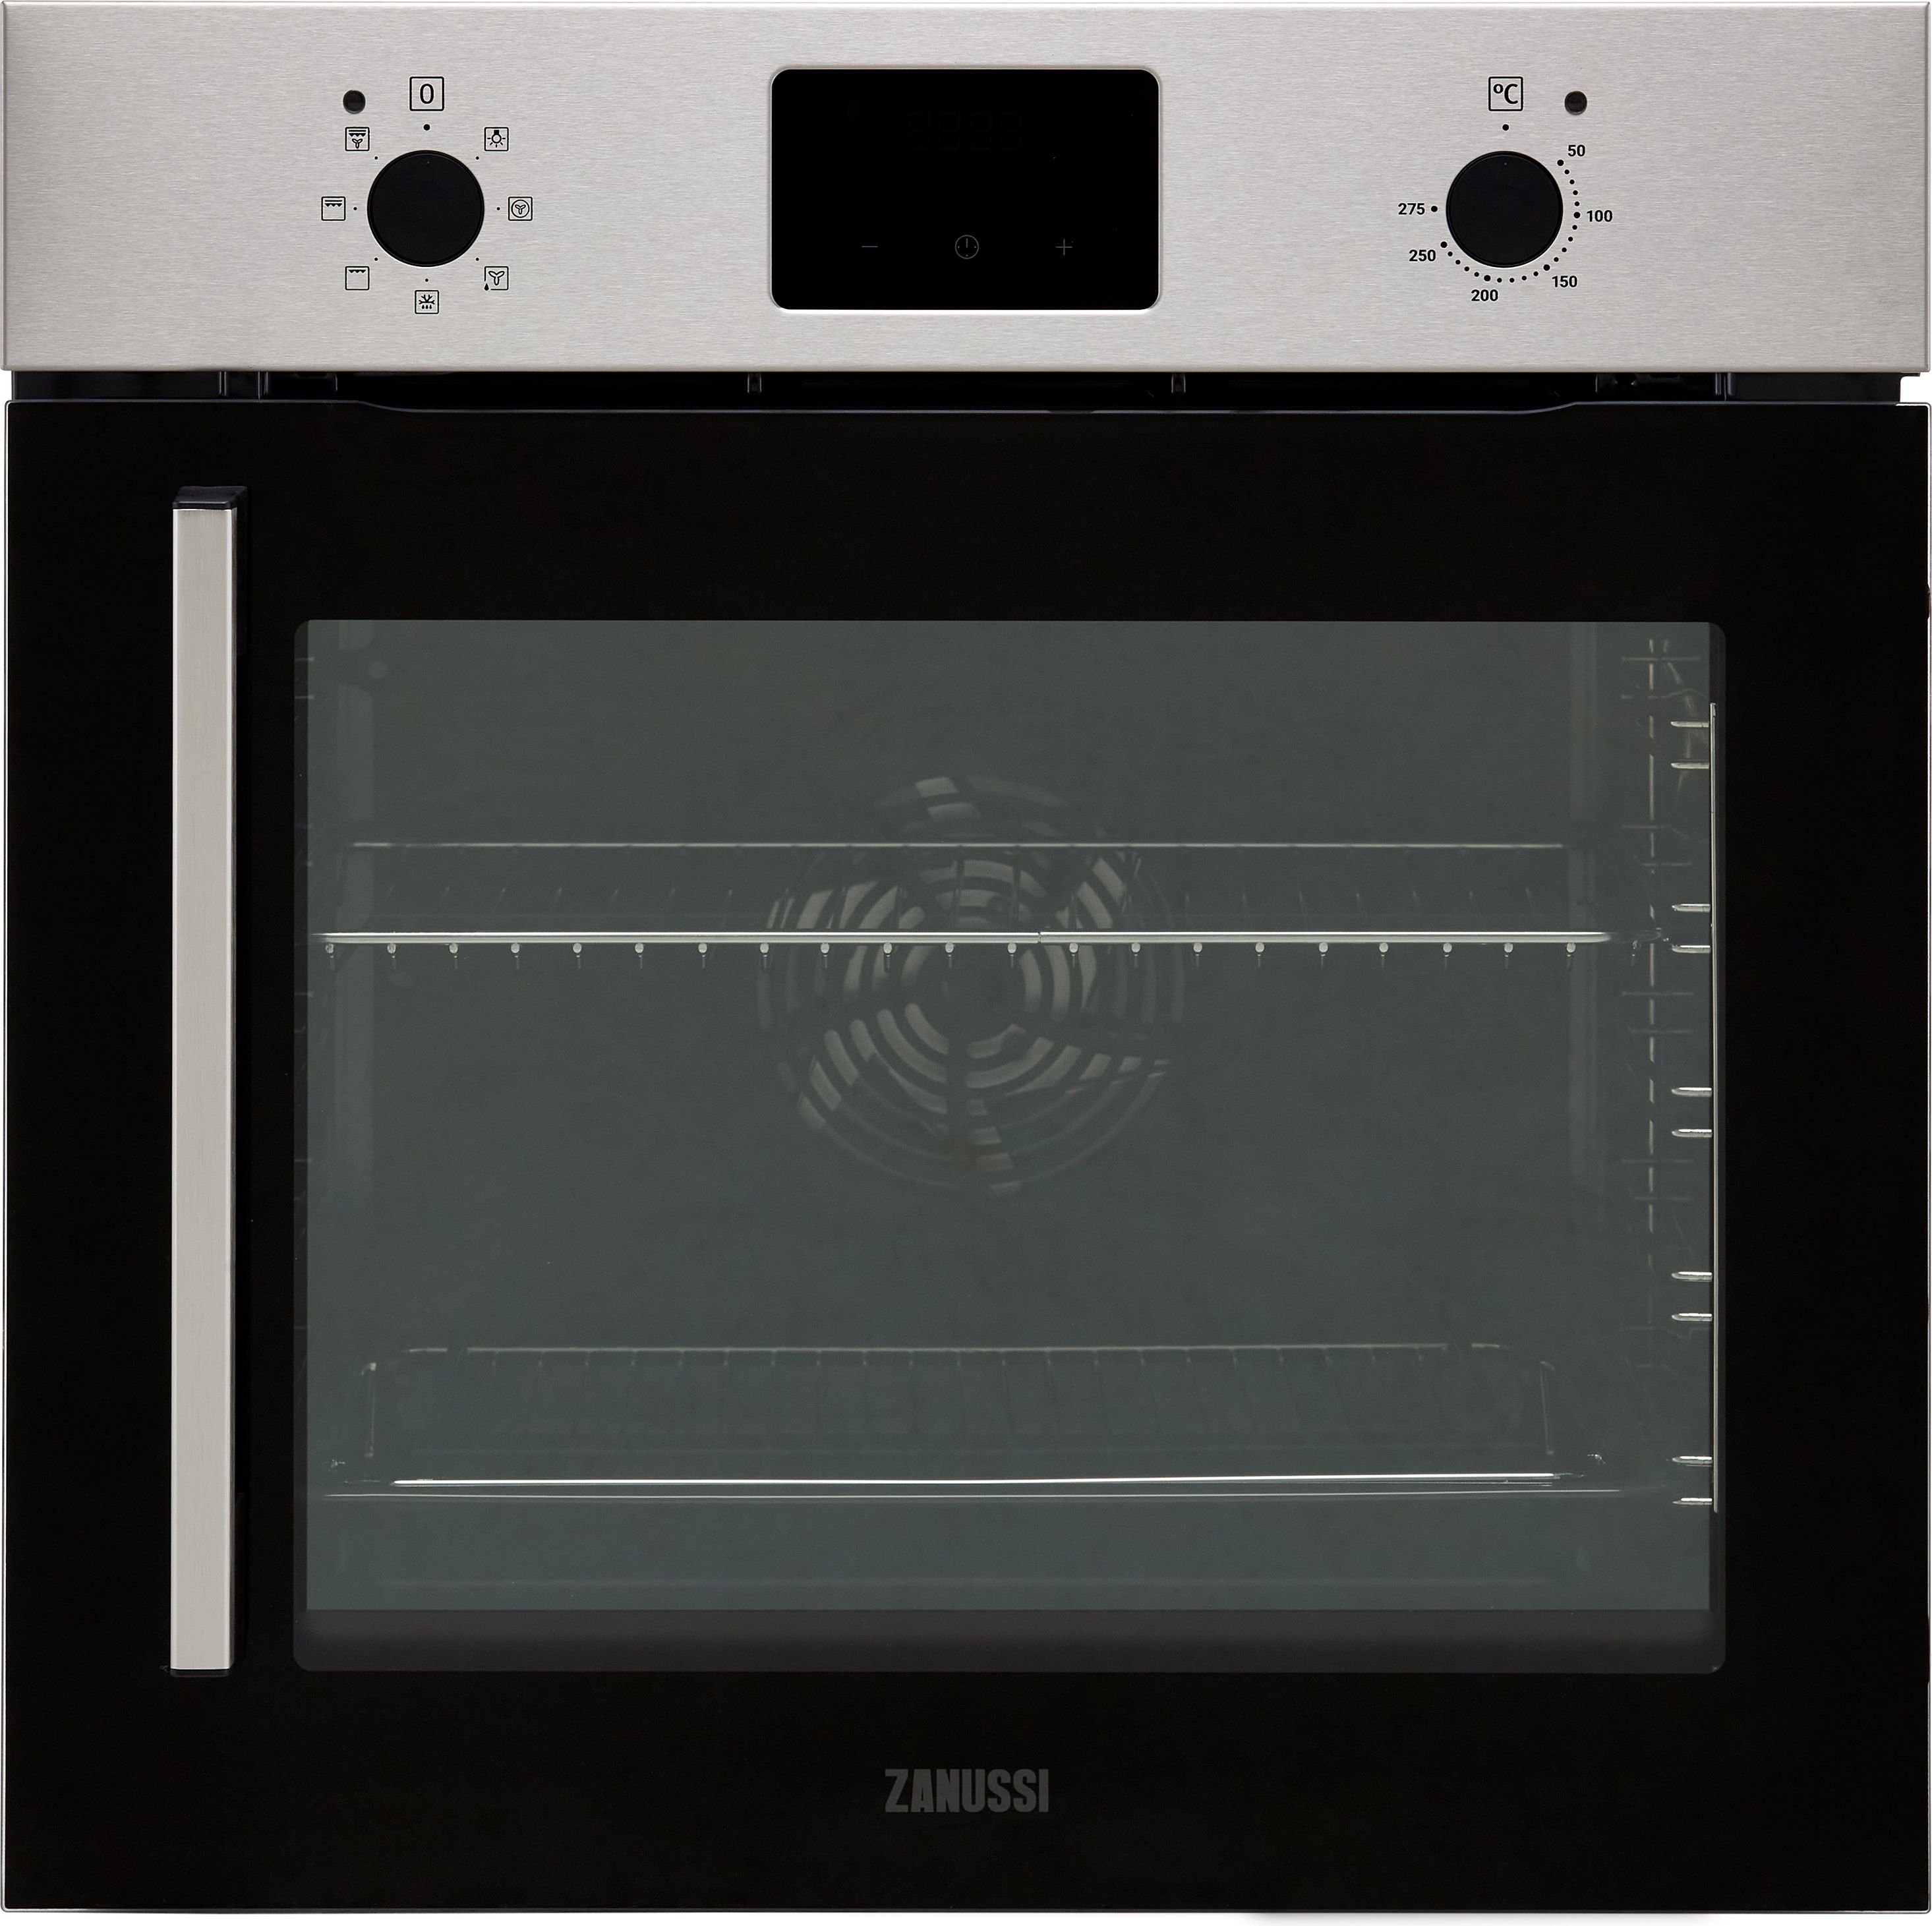 Zanussi ZOCNX3XR Built In Electric Single Oven - Stainless Steel - A Rated, Stainless Steel